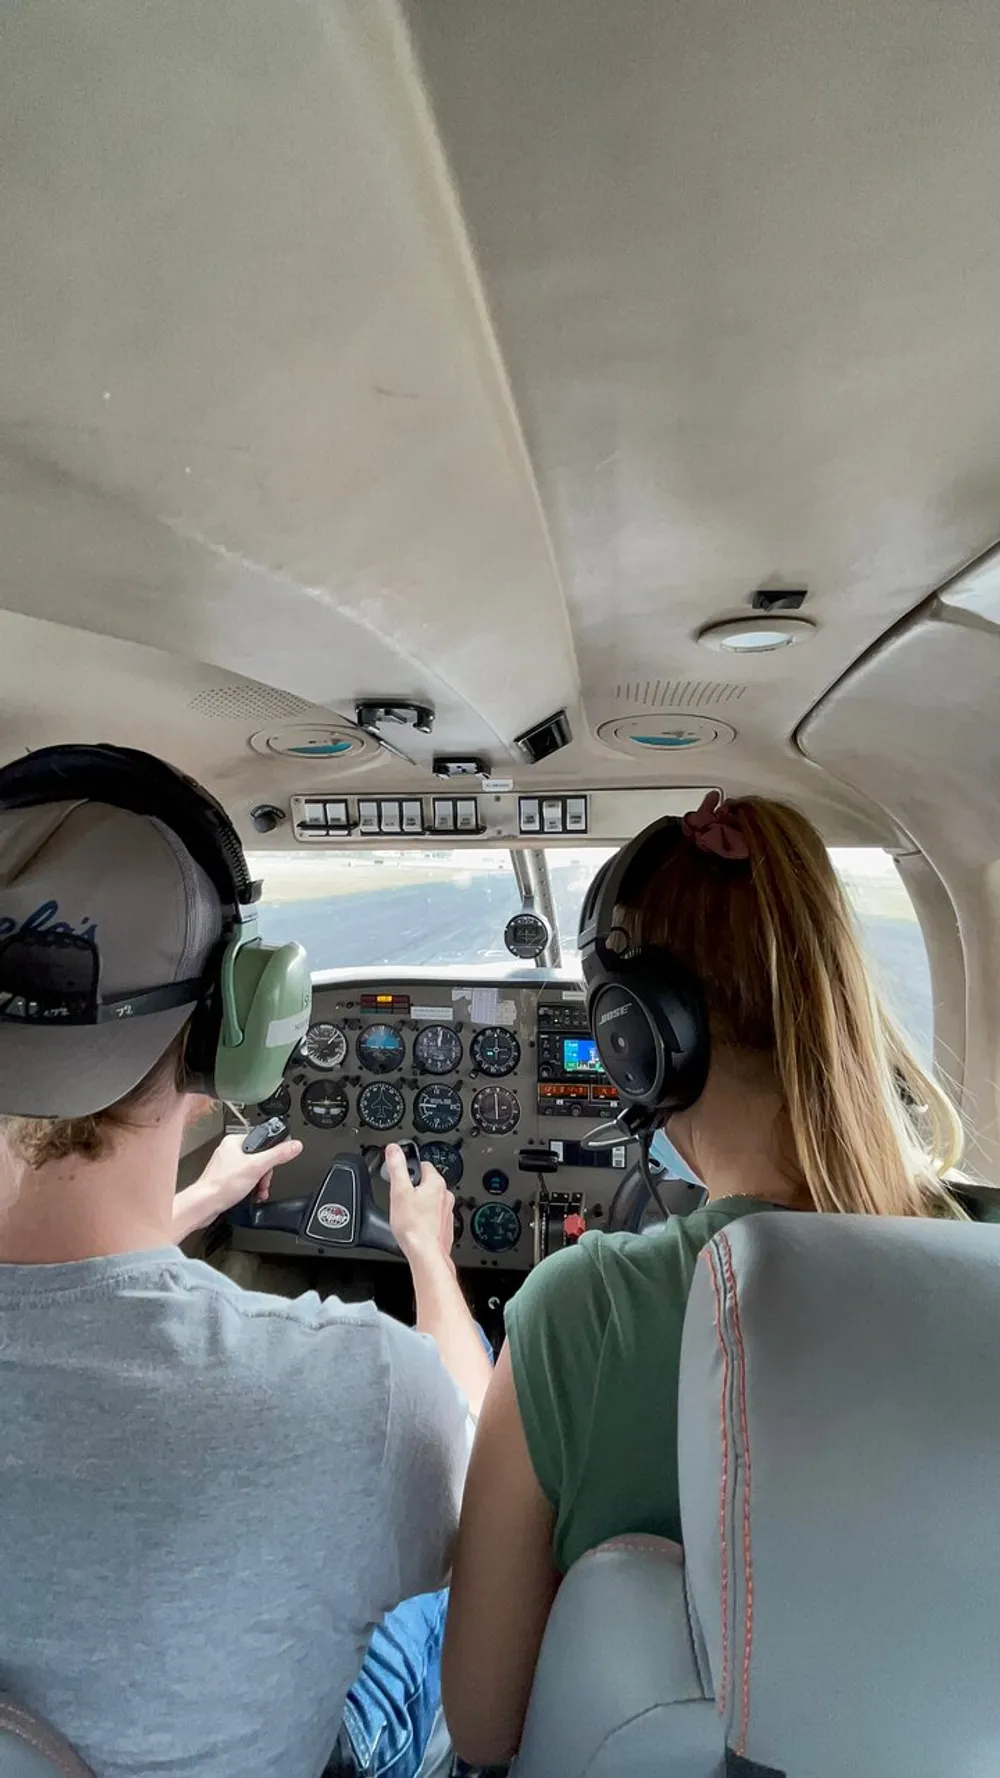 Two people wearing headphones are in the cockpit of a small aircraft with one of them handling the controls